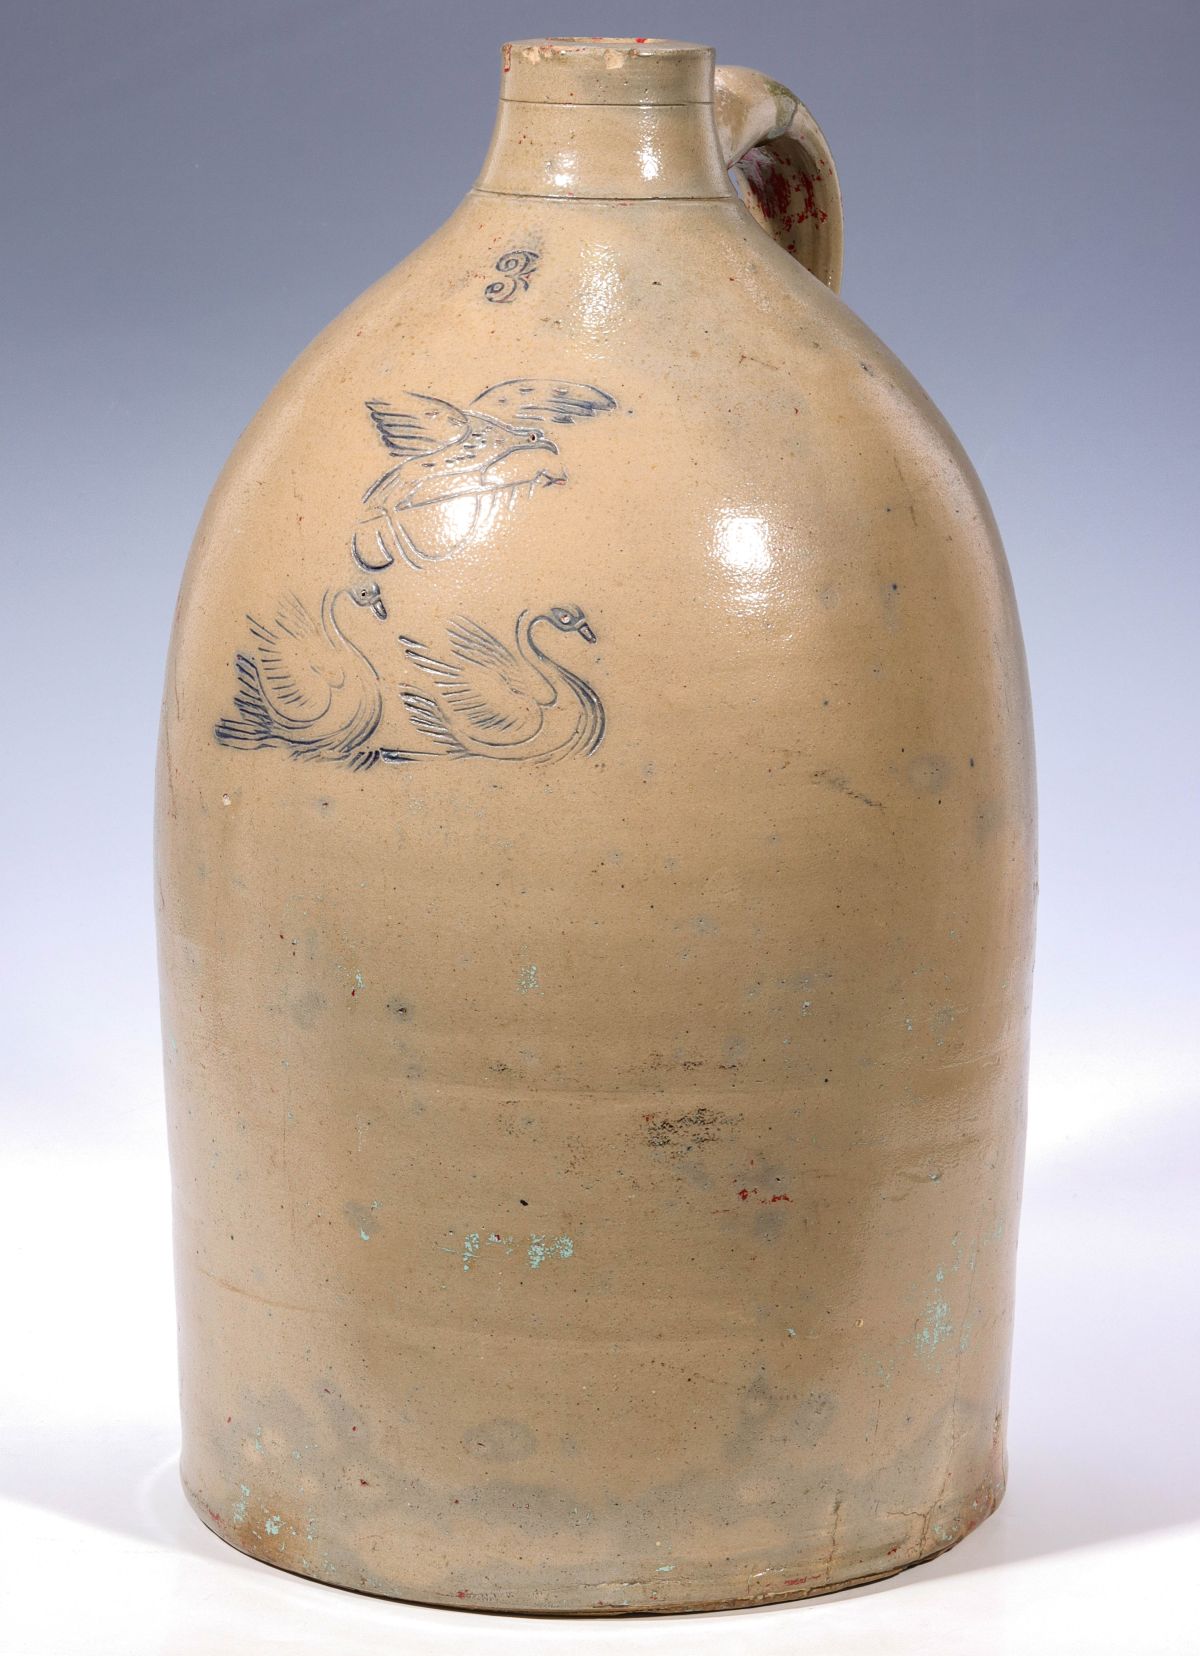 A BLUE DECORATED STONEWARE JUG WITH EAGLE AND SWANS